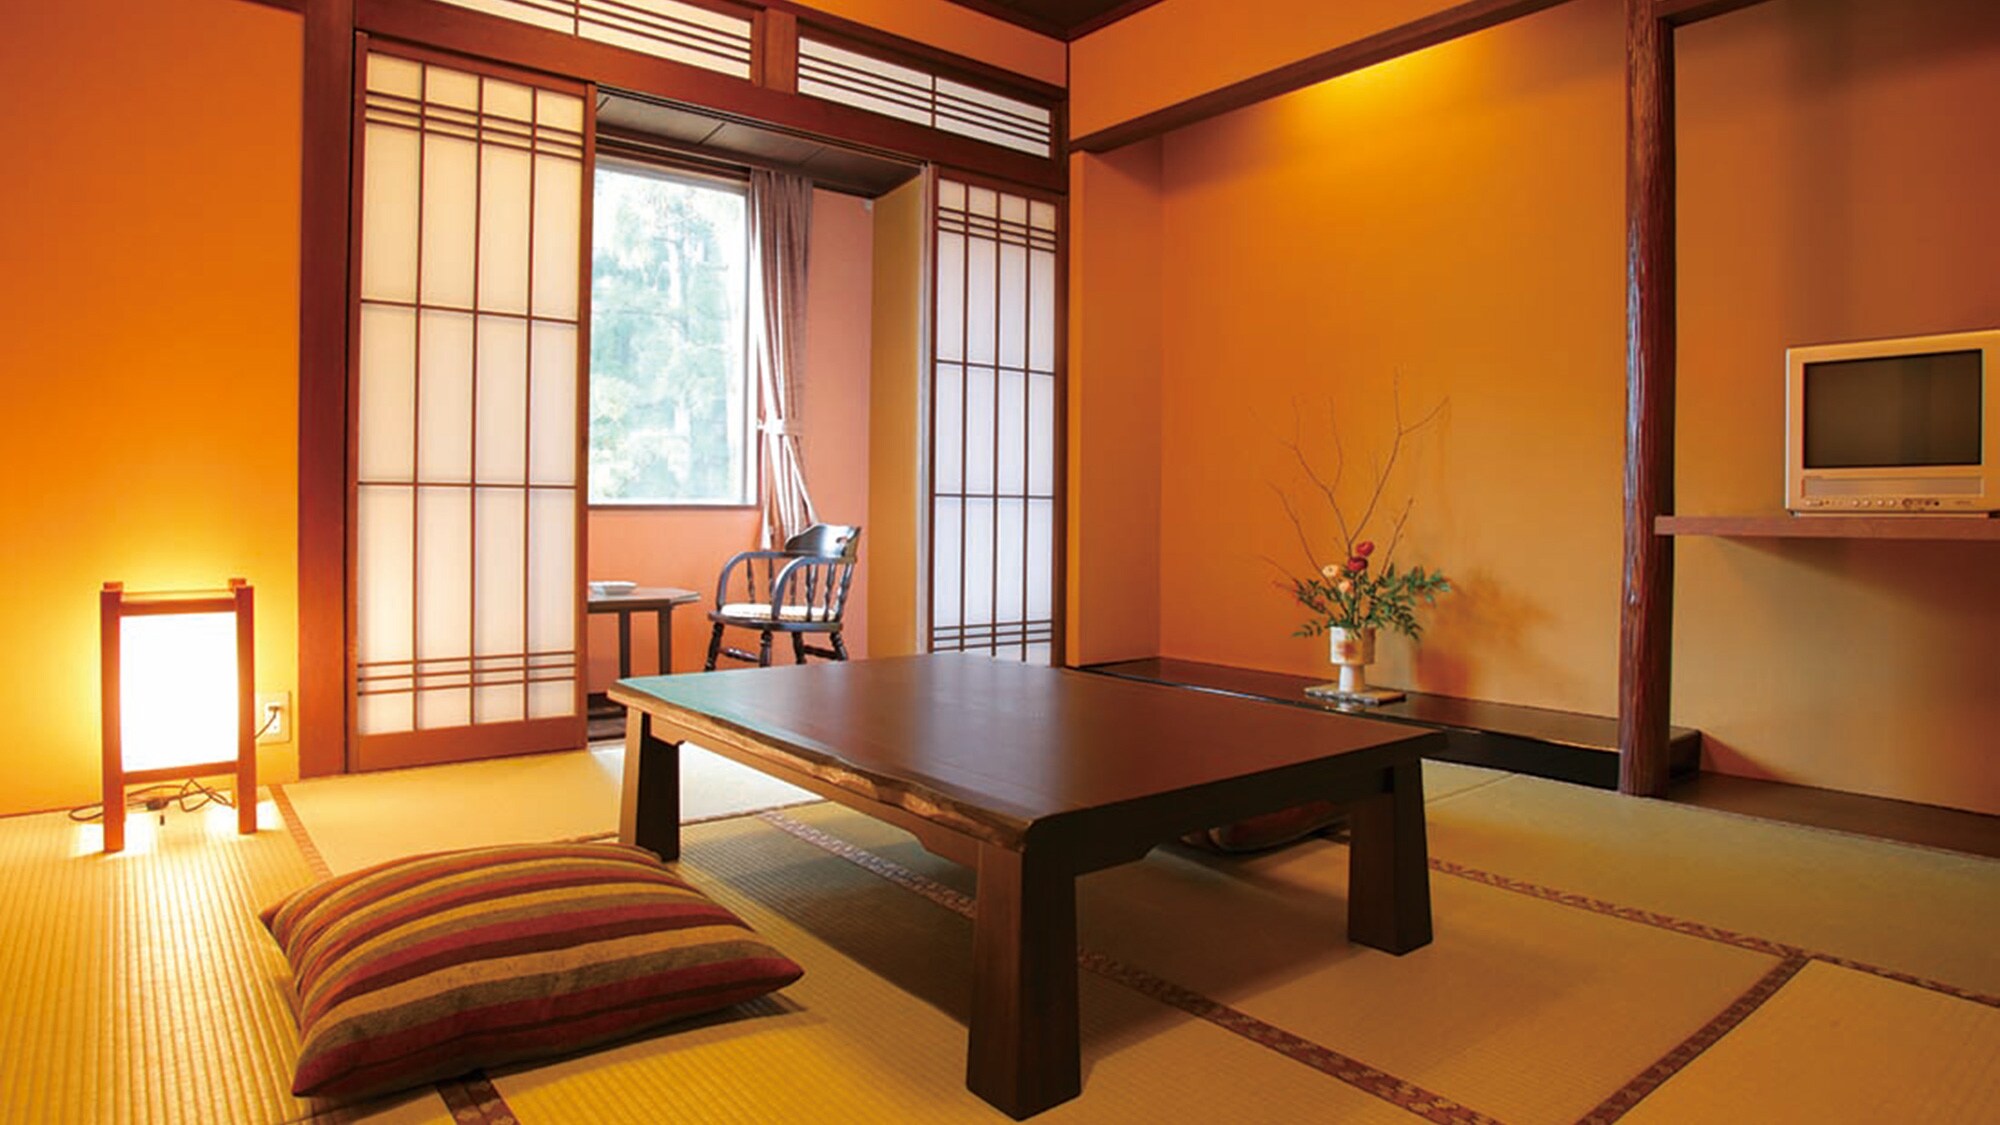 [Japanese-style room] A relaxing Japanese-style room with 8 tatami mats